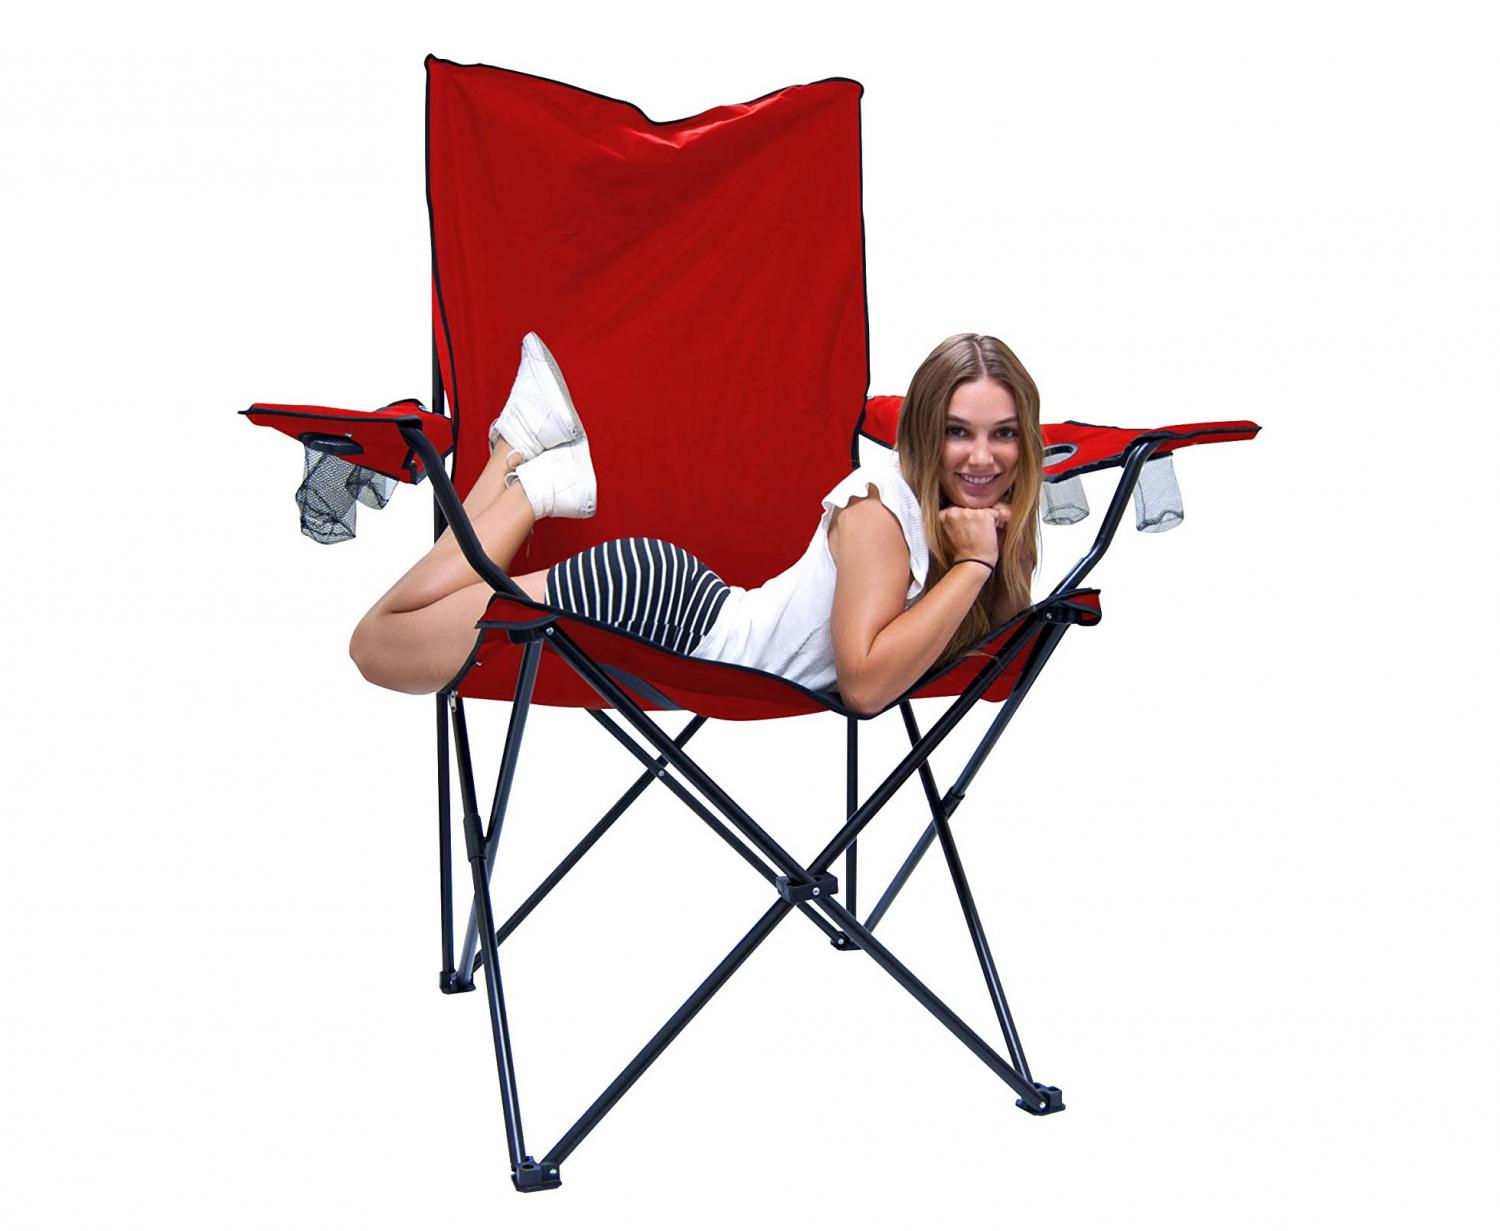 Giant Folding Chair - Giant Travel Chair With 6 Cup Holders